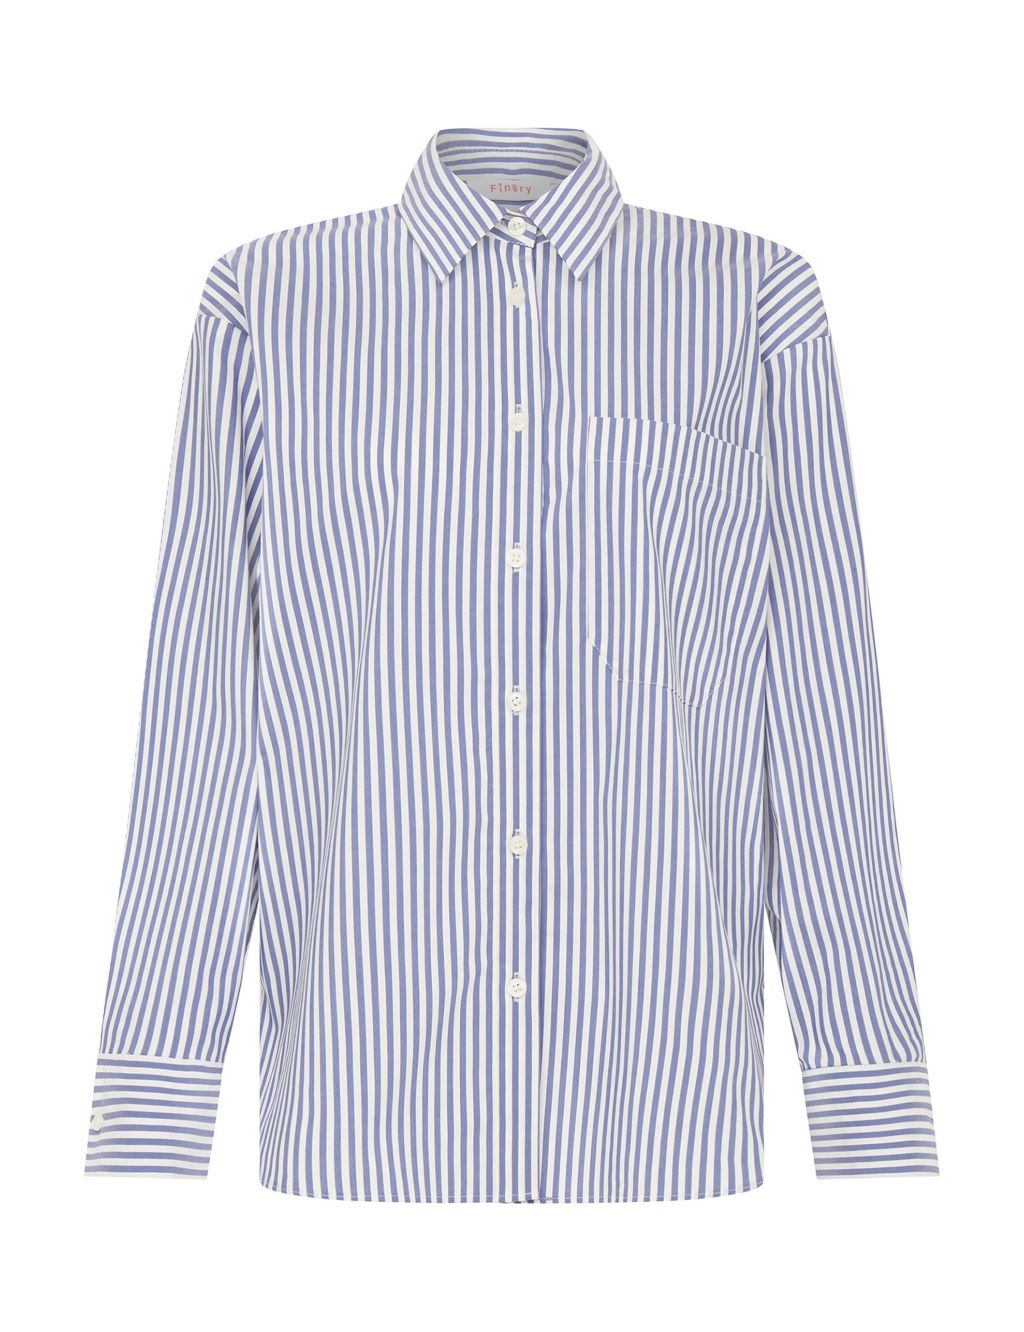 Cotton Rich Striped Collared Shirt | Finery London | M&S